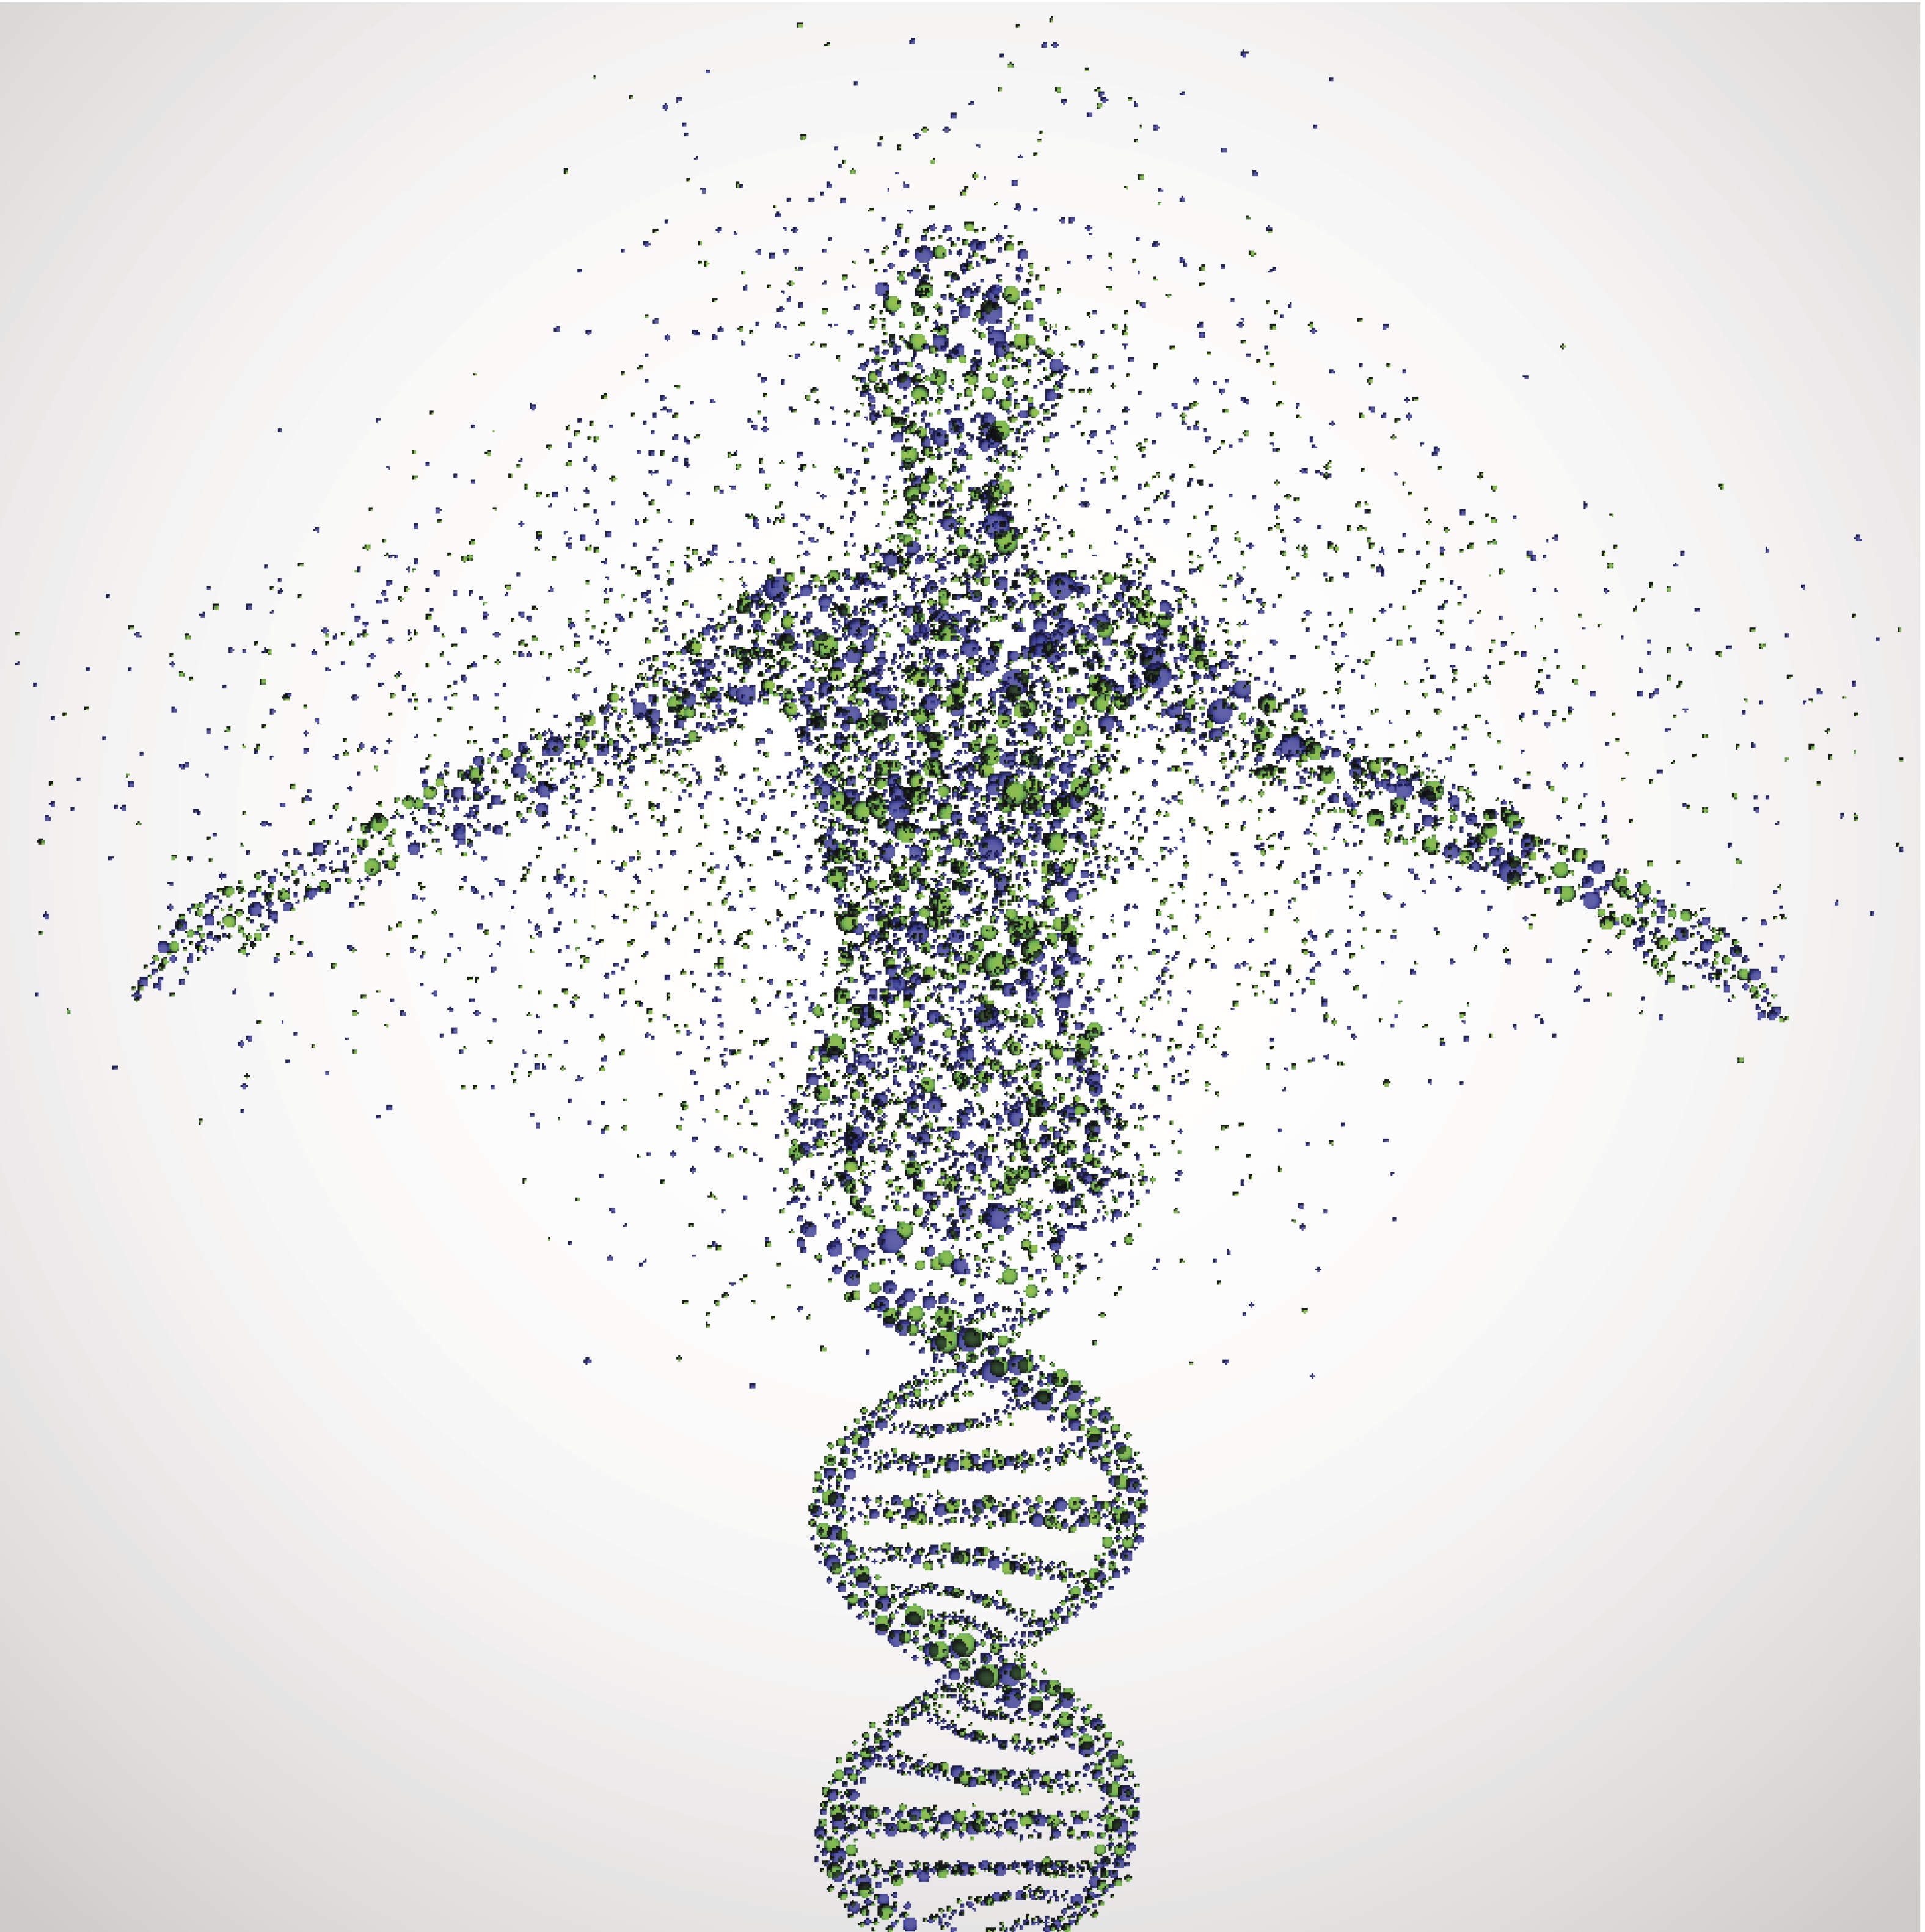 The Human Genome Project is completed. The project, started in 1990, identified all the 20,000 - 25,000 genes in human DNA and determined the sequences of the 3 billion chemical base pairs that make up human DNA.The information gained from the human genome project may lead to revolutionary new ways to diagnose, treat, and prevent thousands of disorders; including cancer.12  1US Department of Energy: Office of Science. http://genomics.energy.gov/                                2National Institutes of Health; National Human Genome Research Institute. www.genome.gov            